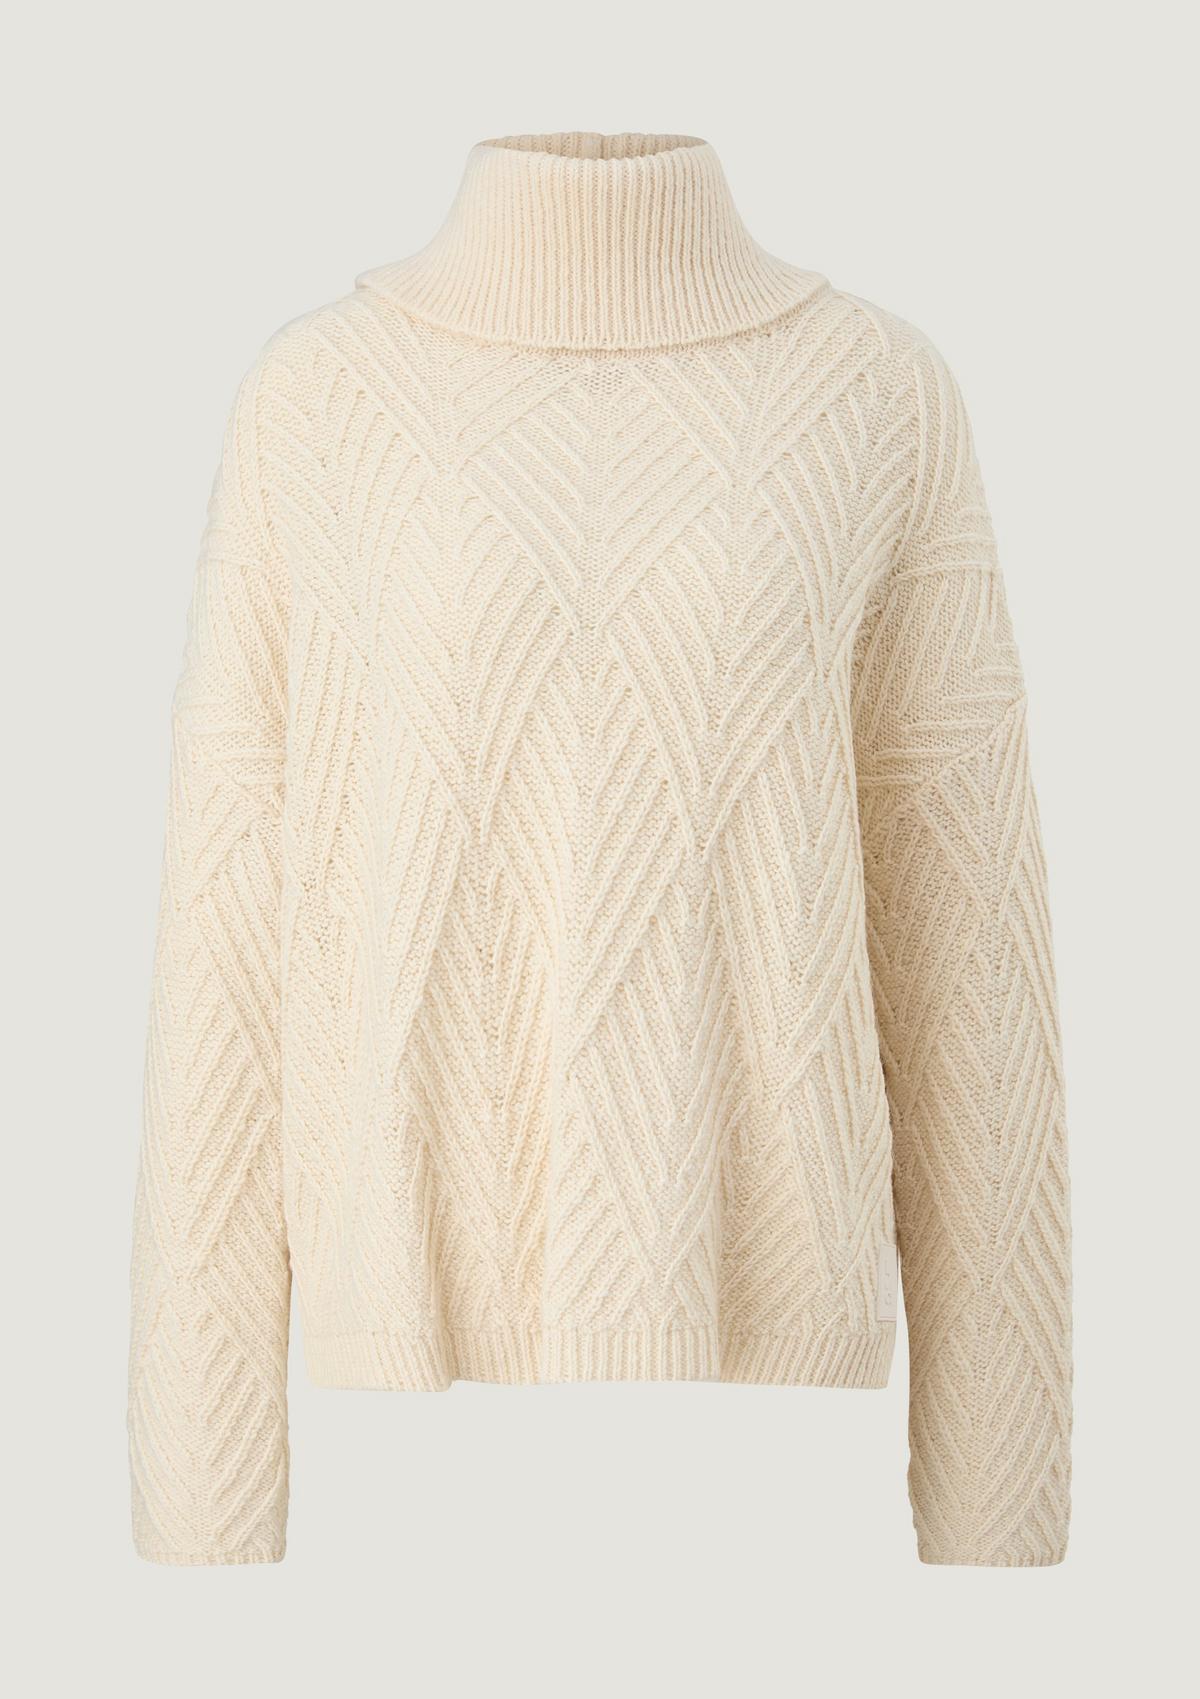 Knitted jumper in a wool blend - white